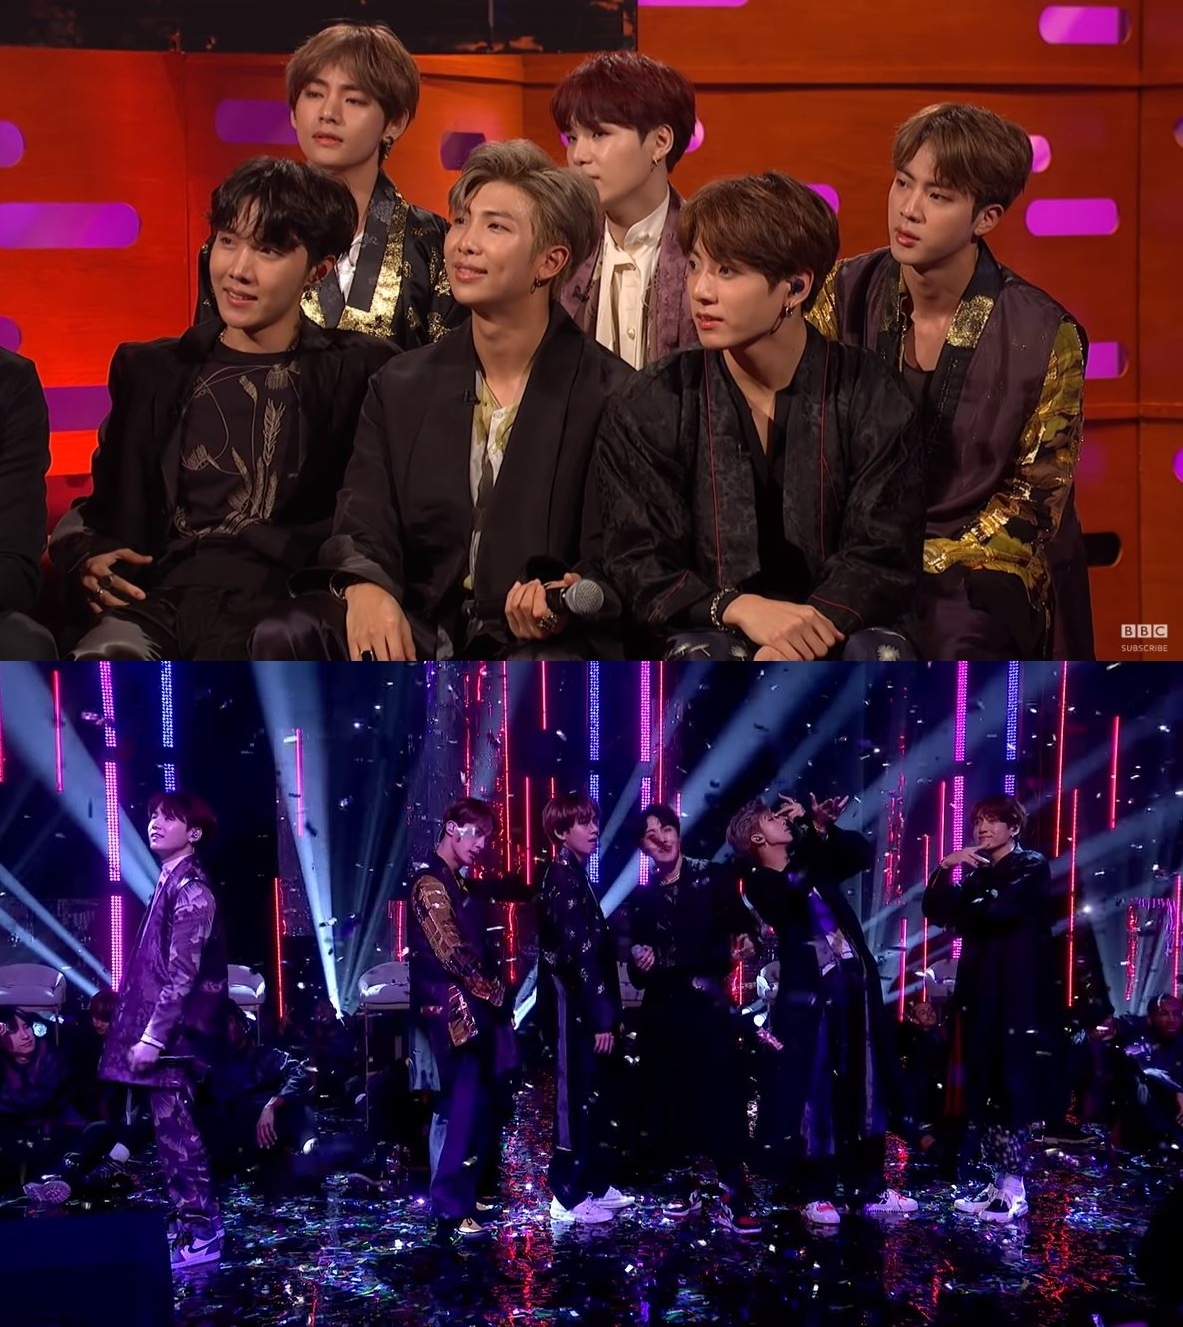 BTS held a concert of LOVE YOURSELF on the 9th and 10th (local time) at the O2 Arena in London, England, selling out all the performances twice.Local media outlets also showed deep interest in BTSs UK performance.The BBC has introduced BTS as The Beatles of the 21st century, a global pop sensation, and has sold out the O2 Arena performance and is the largest presence in the former World Music scene.The Guardian also introduced BTS has made a monumental achievement at United States of America, not only changing the face of pop music, but also being the first Korean group to reach the top of the Western Music industry.BTS members deal with social issues by putting their psychology in the lyrics, and defend the generation they belong to.The authenticity of BTS is a theme that penetrates the LOVE YOURSELF series album, and the RM speech at United Nations is in this context, he said.The natural behavior and camaraderie among members are the elements that make BTS attractive, and this bond is the power to hold them together.The Guardian praised BTSs UK performance with the expression warmth and surprise shown by the former World popular boy group BTS.In addition, the colorful visuals were impressive throughout the performance, and even the images that came out while changing the costumes to change the stage were gorgeous and seemed to see art movies. BTS made each other and fans feel warm.Through this performance, I showed a message that everyone is important. Meanwhile, BTS appeared on the BBCs The Graham Norton Show, the UKs best late-night talk show, on Wednesday as its last schedule in the UK.On this day, BTS first showed IDOL stage in the hot shouts and cheers of the audience.In the talk that followed the host Graham Norton, he talked about various stories such as introduction of individual members, global cover model of United States of America time, and United Nations regular general meeting speech.In particular, when asked about the message of the United Nations regular general meeting speech, RM said, Life always has a dilemma.We can not avoid It, he said. We wanted to find our own way to love ourselves, so that young people can live happier and better lives.It was our message, he explained.Wufi Goldberg, who participated as a guest, listened to RMs answer and gave his shirt as a gift on the spot as a gesture of impression.On the show, Jamie Donnon, Rosamond Pike and Harry Connick Jr. also appeared as guests with BTS.Meanwhile, BTS will continue its LOVE YOURSELF tour at Amstejigo Dome in the Netherlands on Thursday.